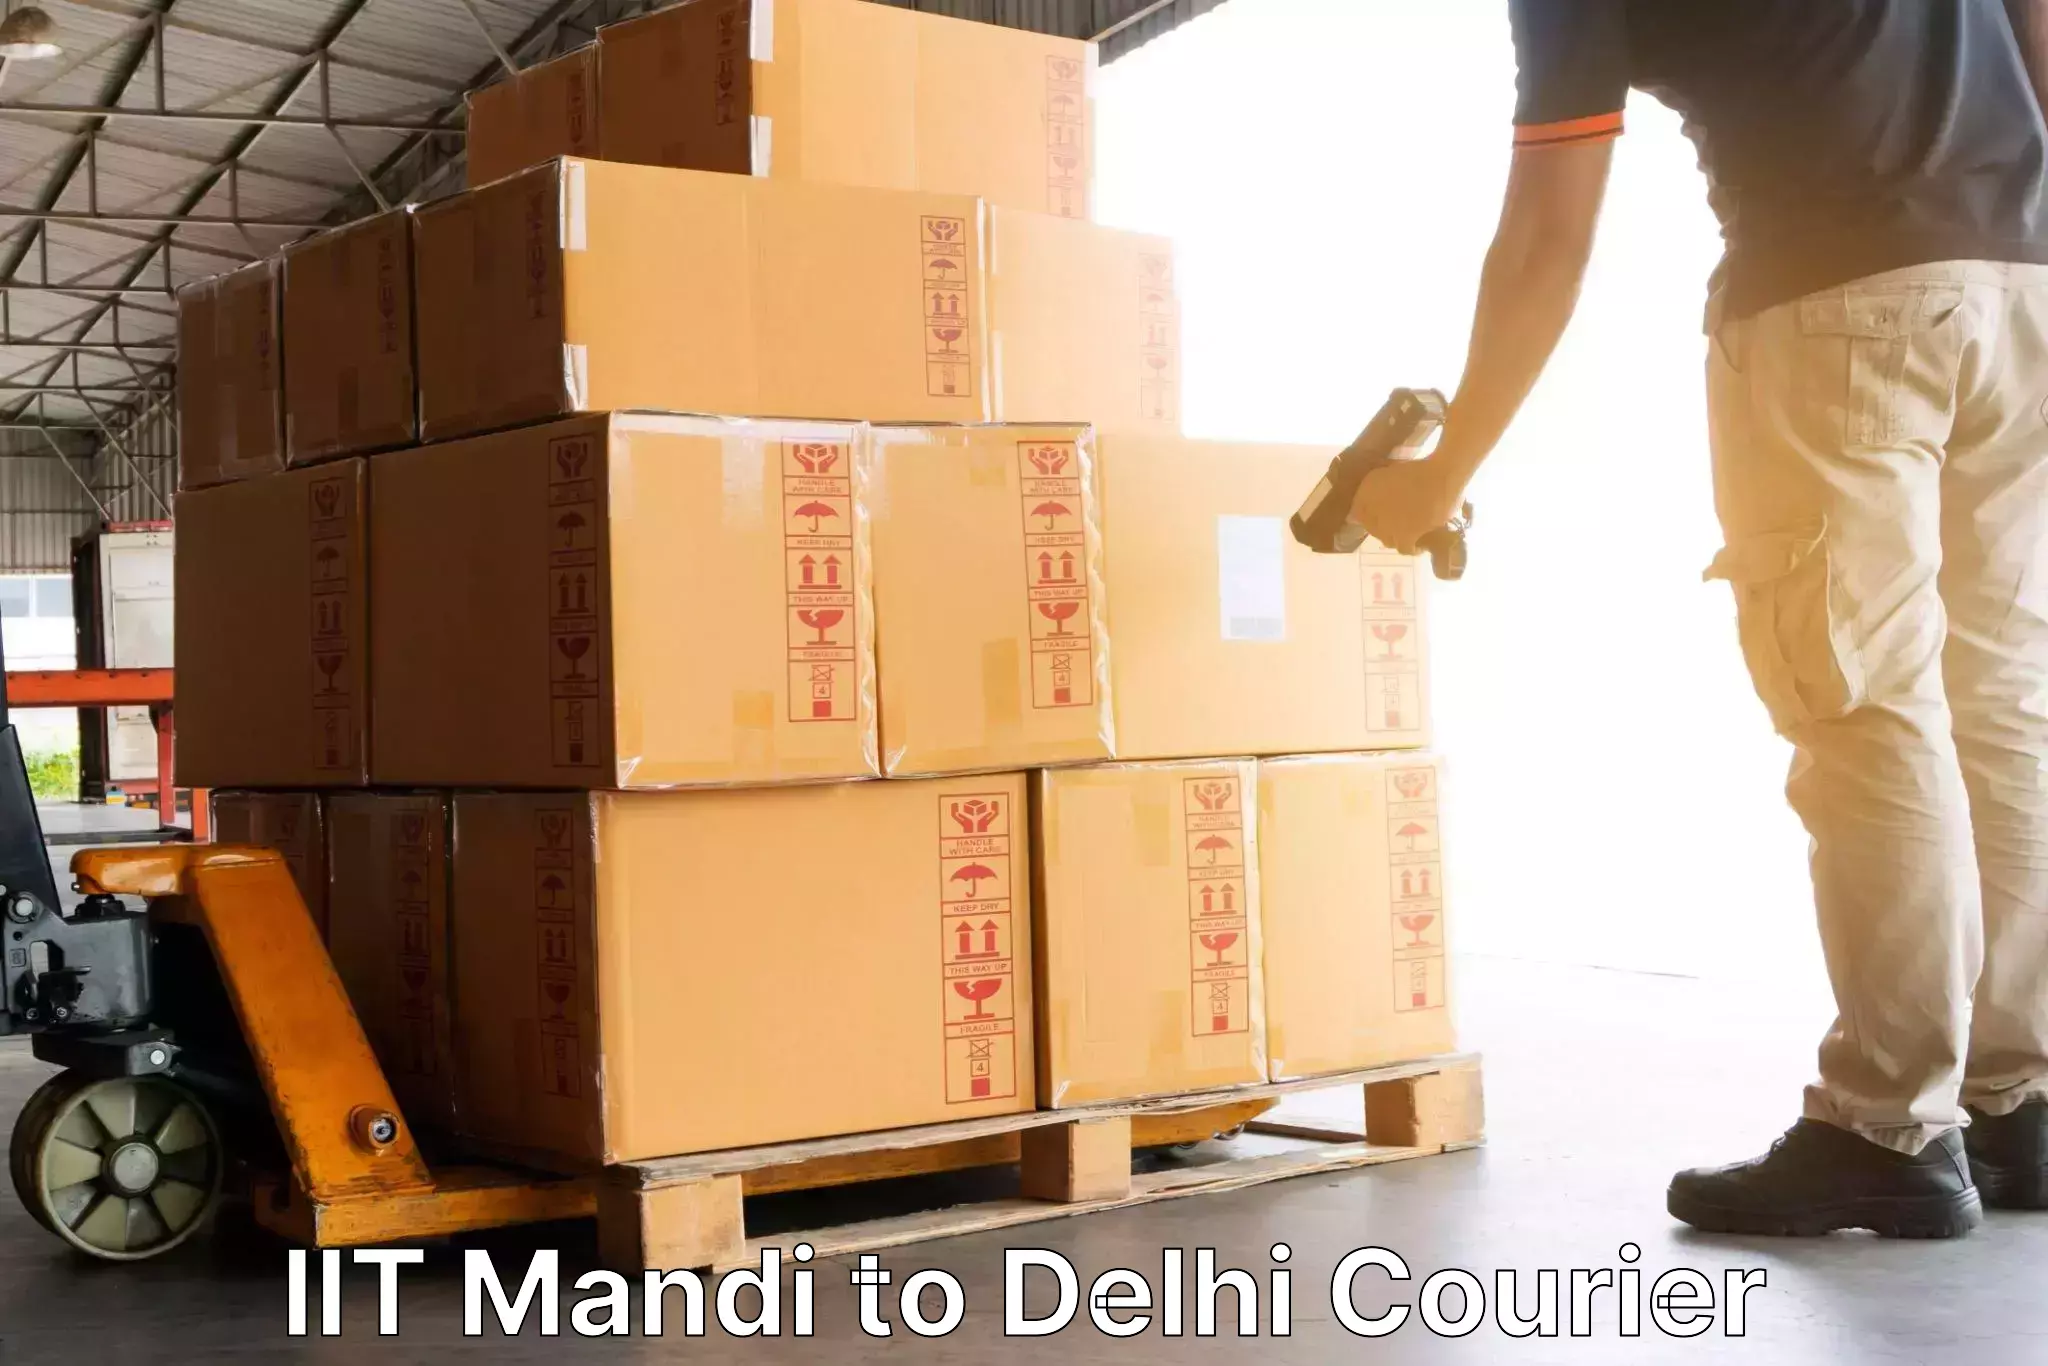 Urban courier service IIT Mandi to NCR